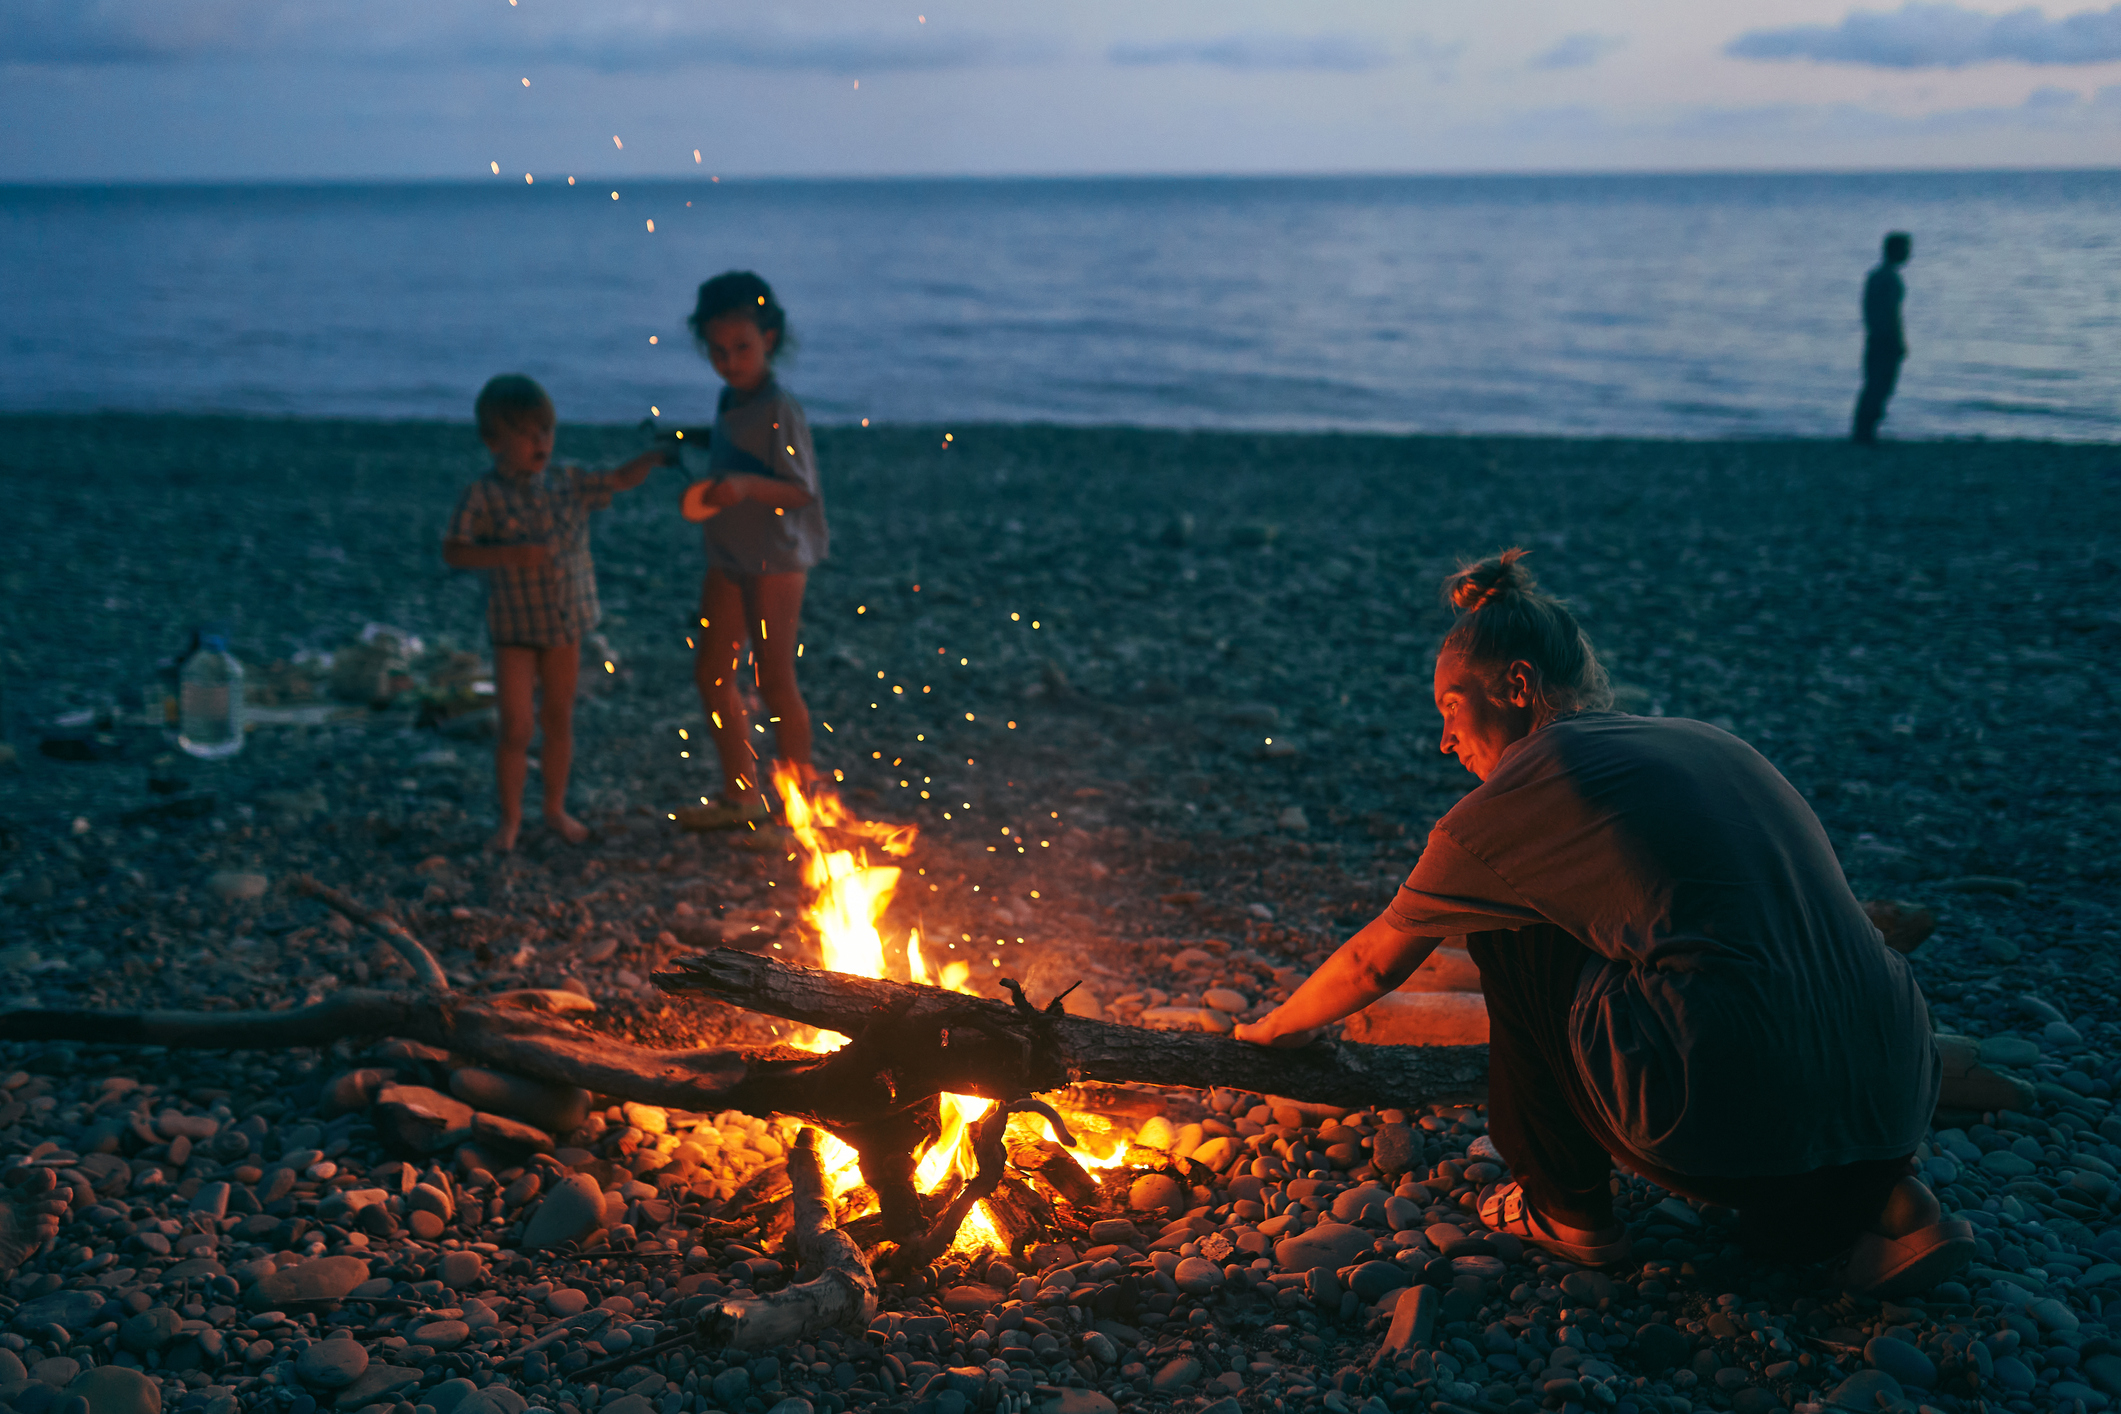 A woman by campfire with two children at the beach at night